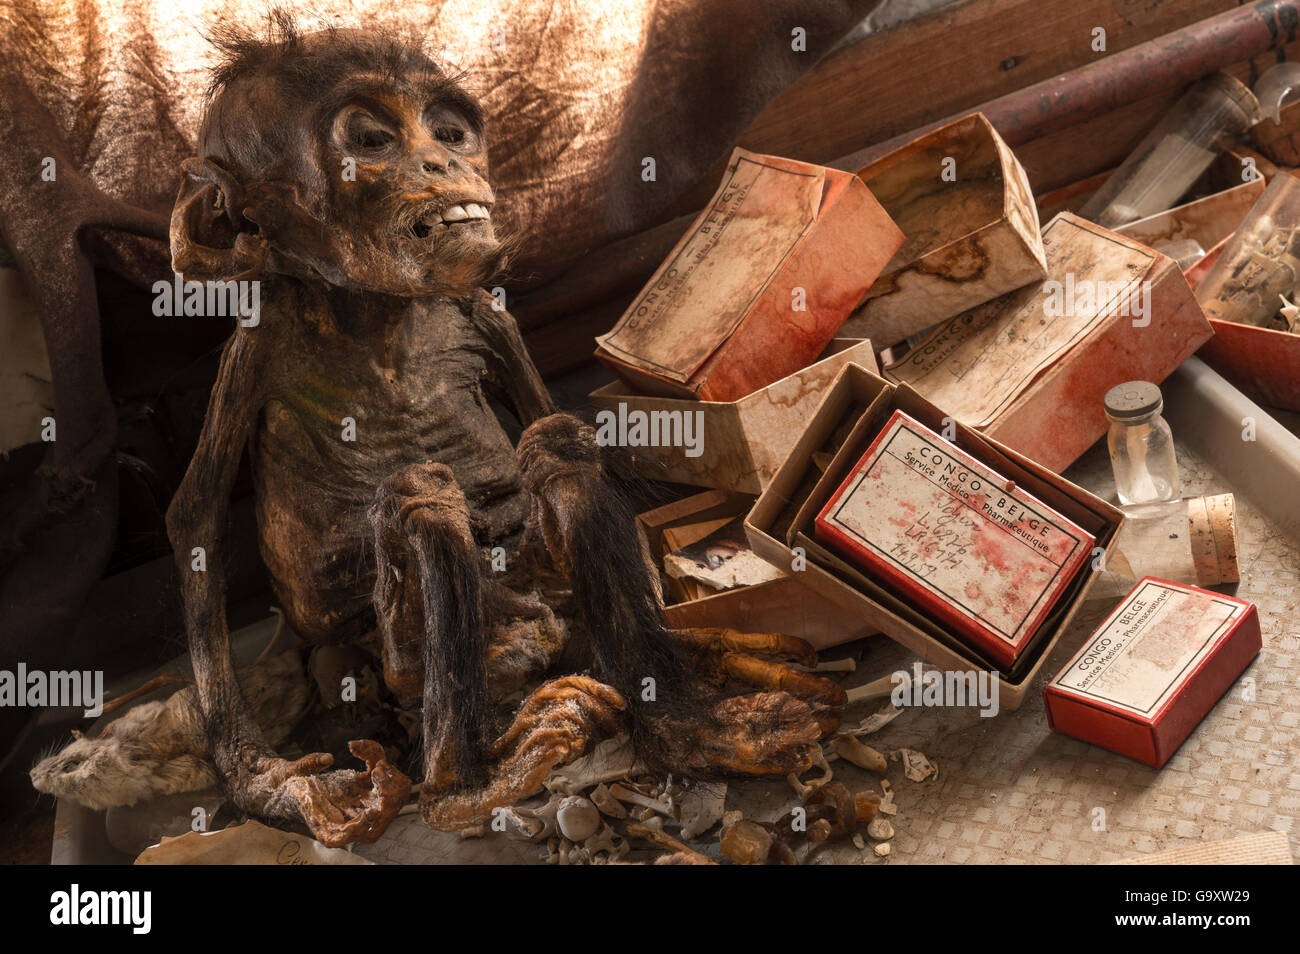 Mummified infant Chimpanzee (Pan troglodytes) a relic from  research from 1959, amongst old laboratory paraphernalia and assorte Stock Photo